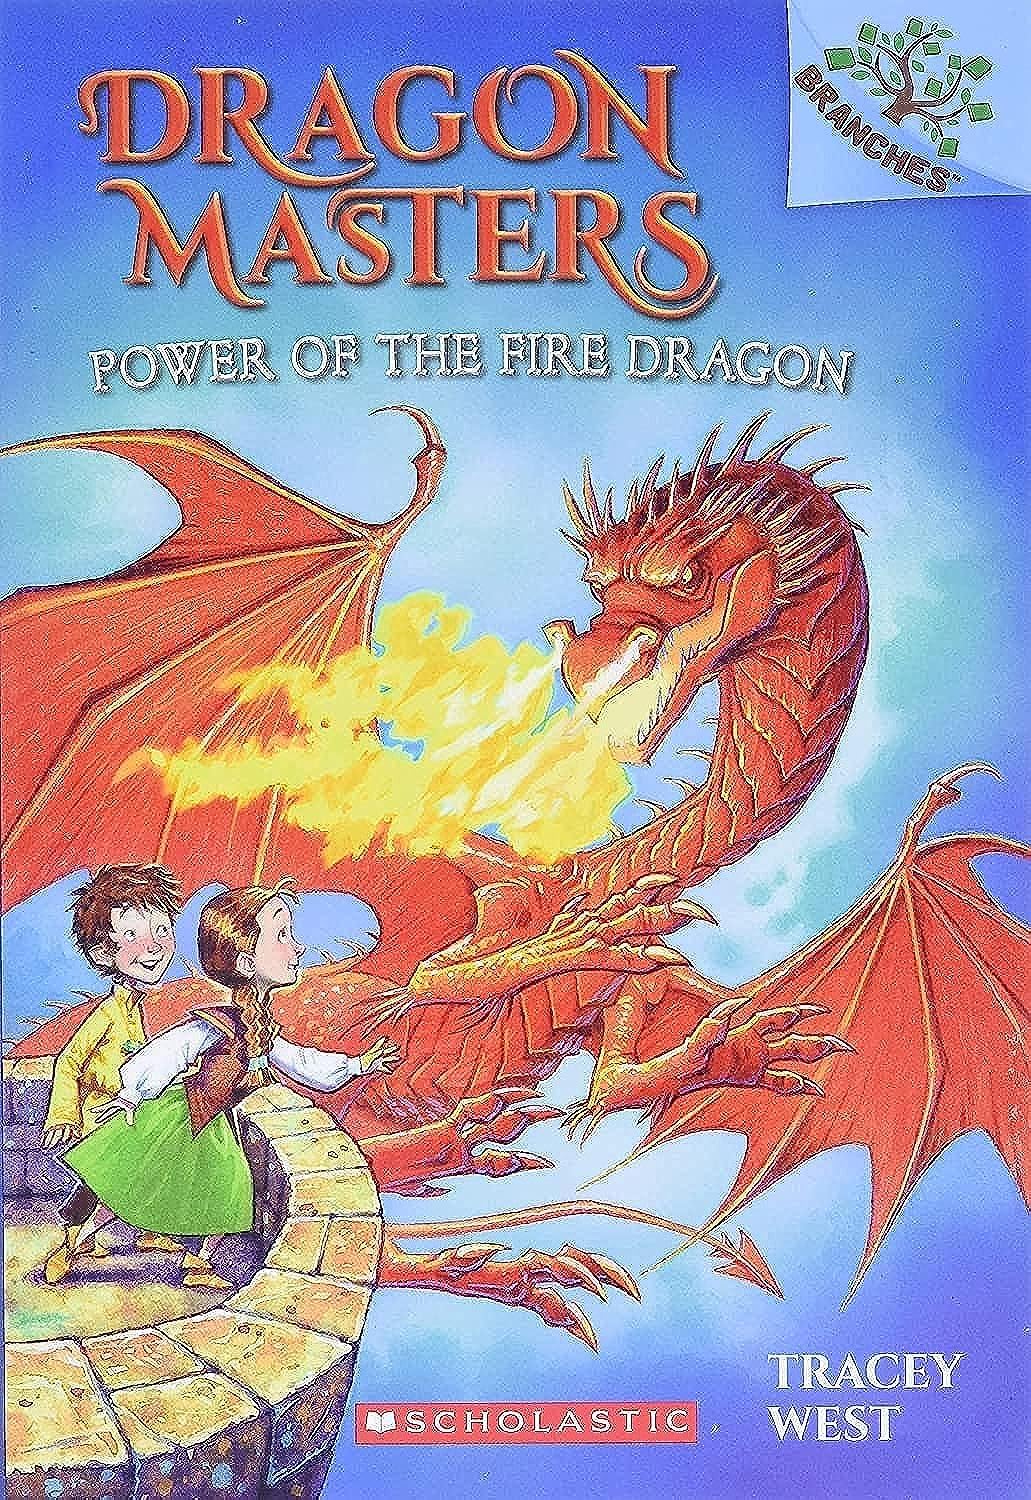 Power of the Fire Dragon: A Branches Book (Dragon Masters 4): Volume 4 (Dragon Masters)